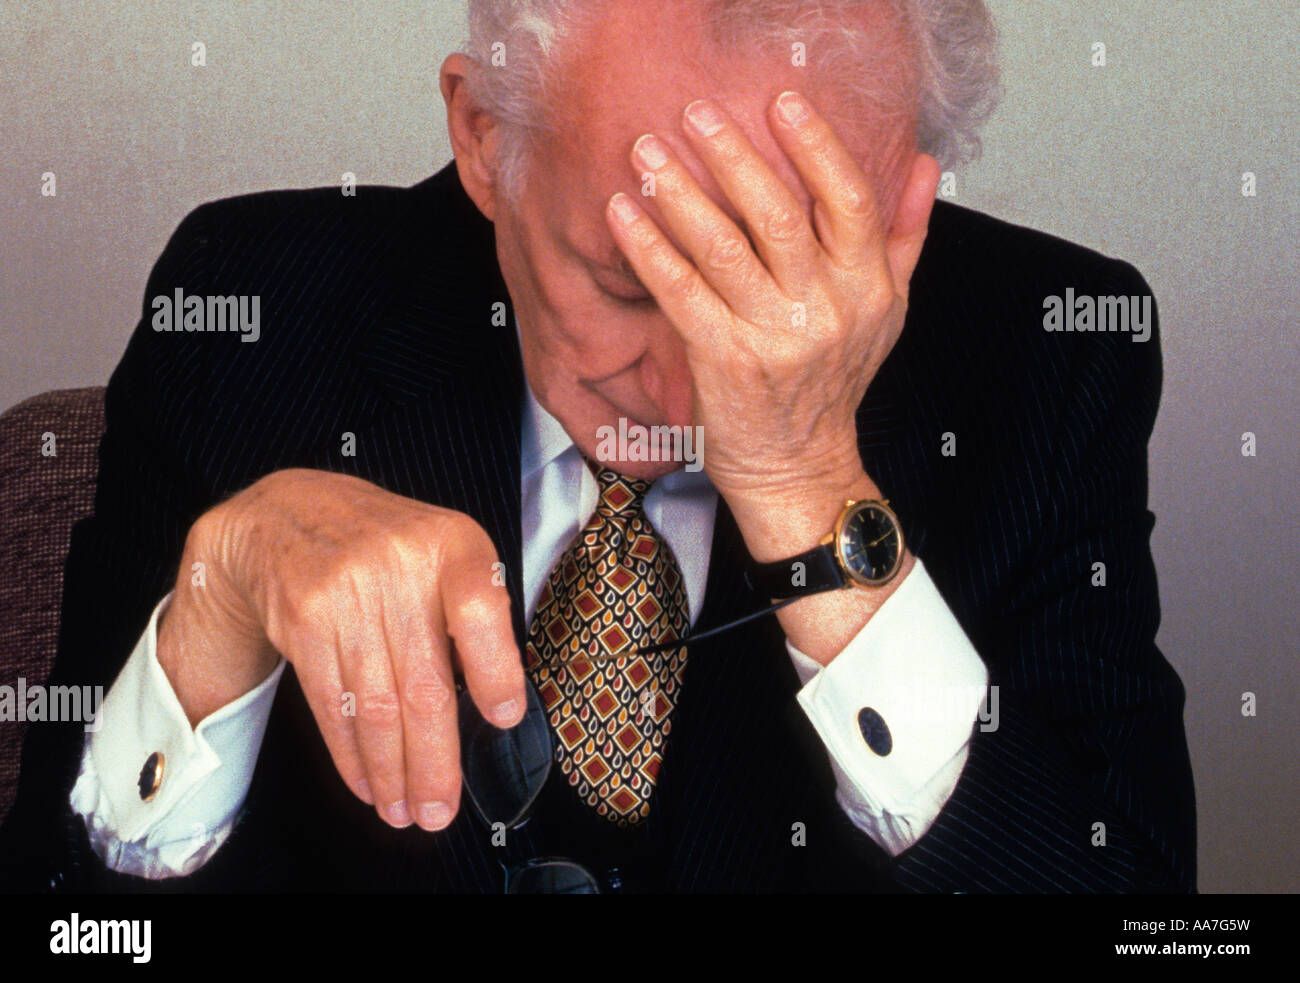 elderly tired discouraged formally well dressed businessman alone in office with his hand to his head Stock Photo